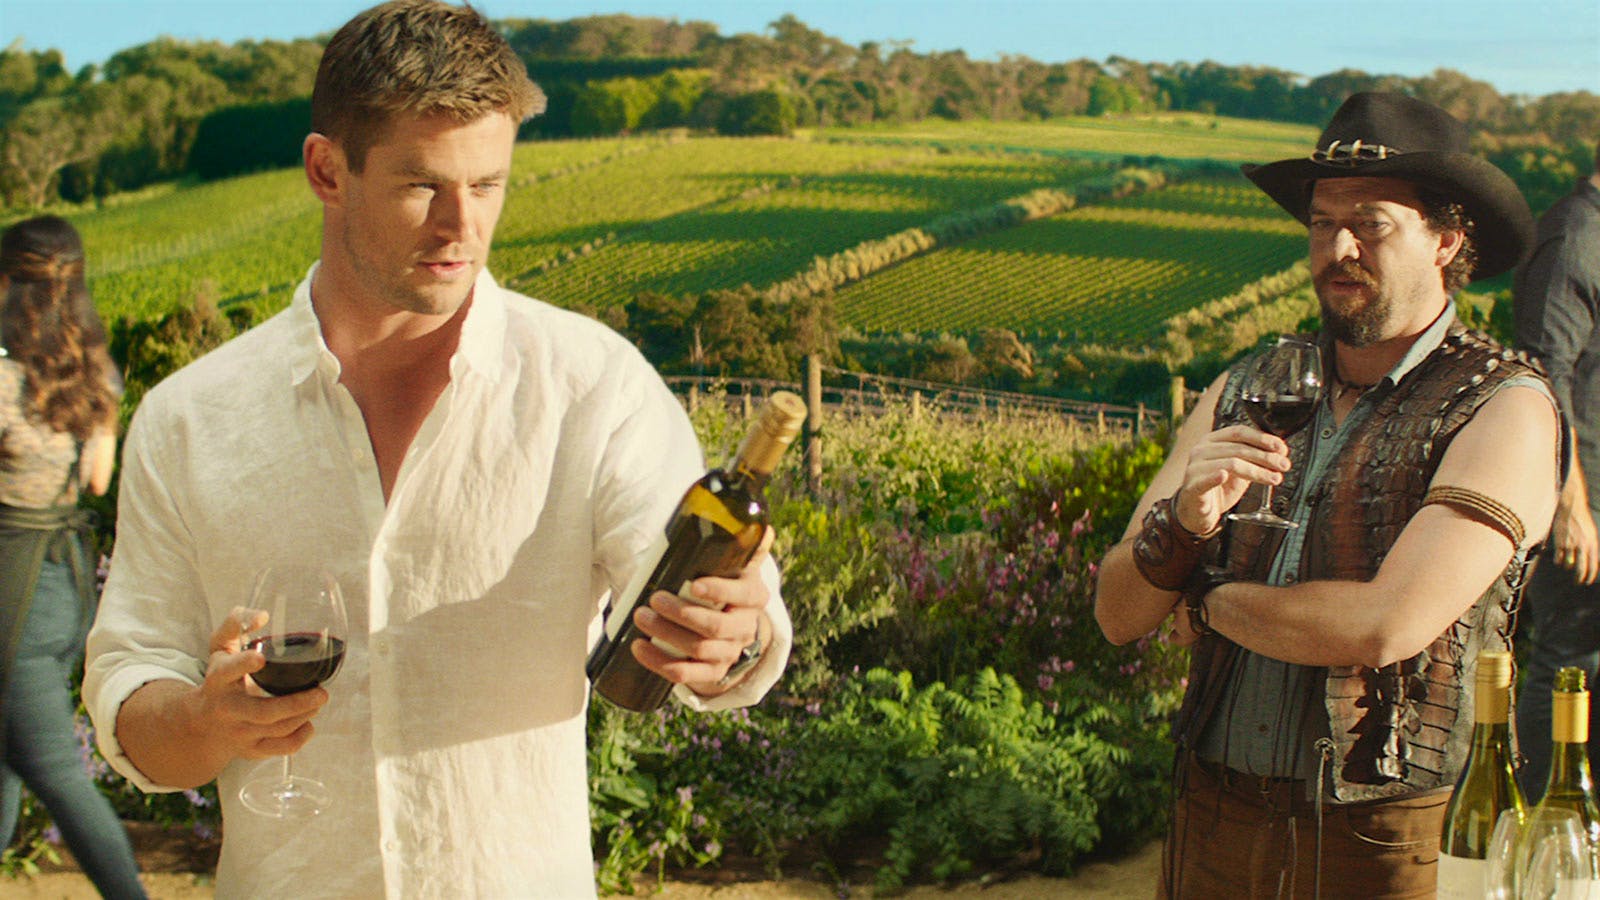 The Wines Behind the Scenes in That 'Crocodile Dundee' Spoof